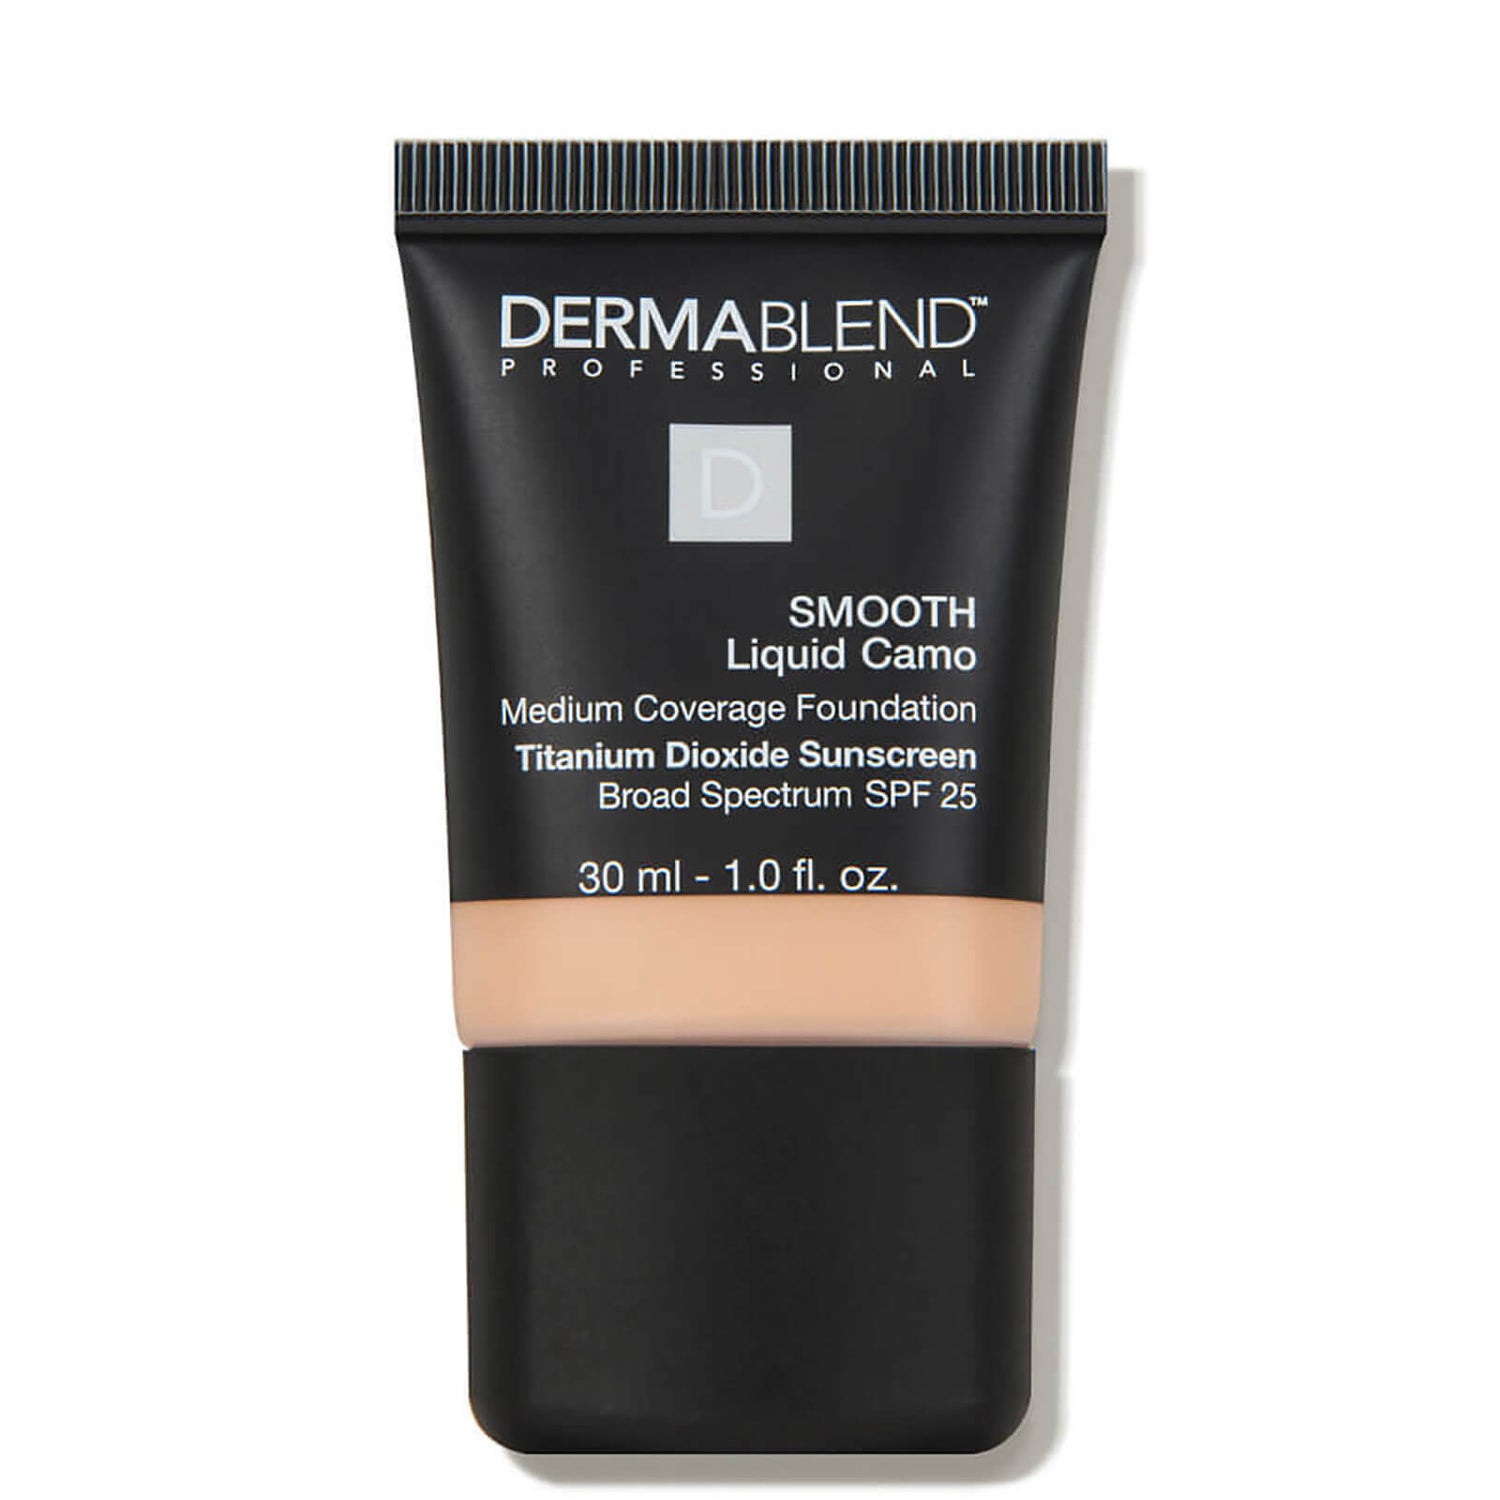 Dermablend Smooth Liquid Camo Foundation SPF 25 (Various Shades)